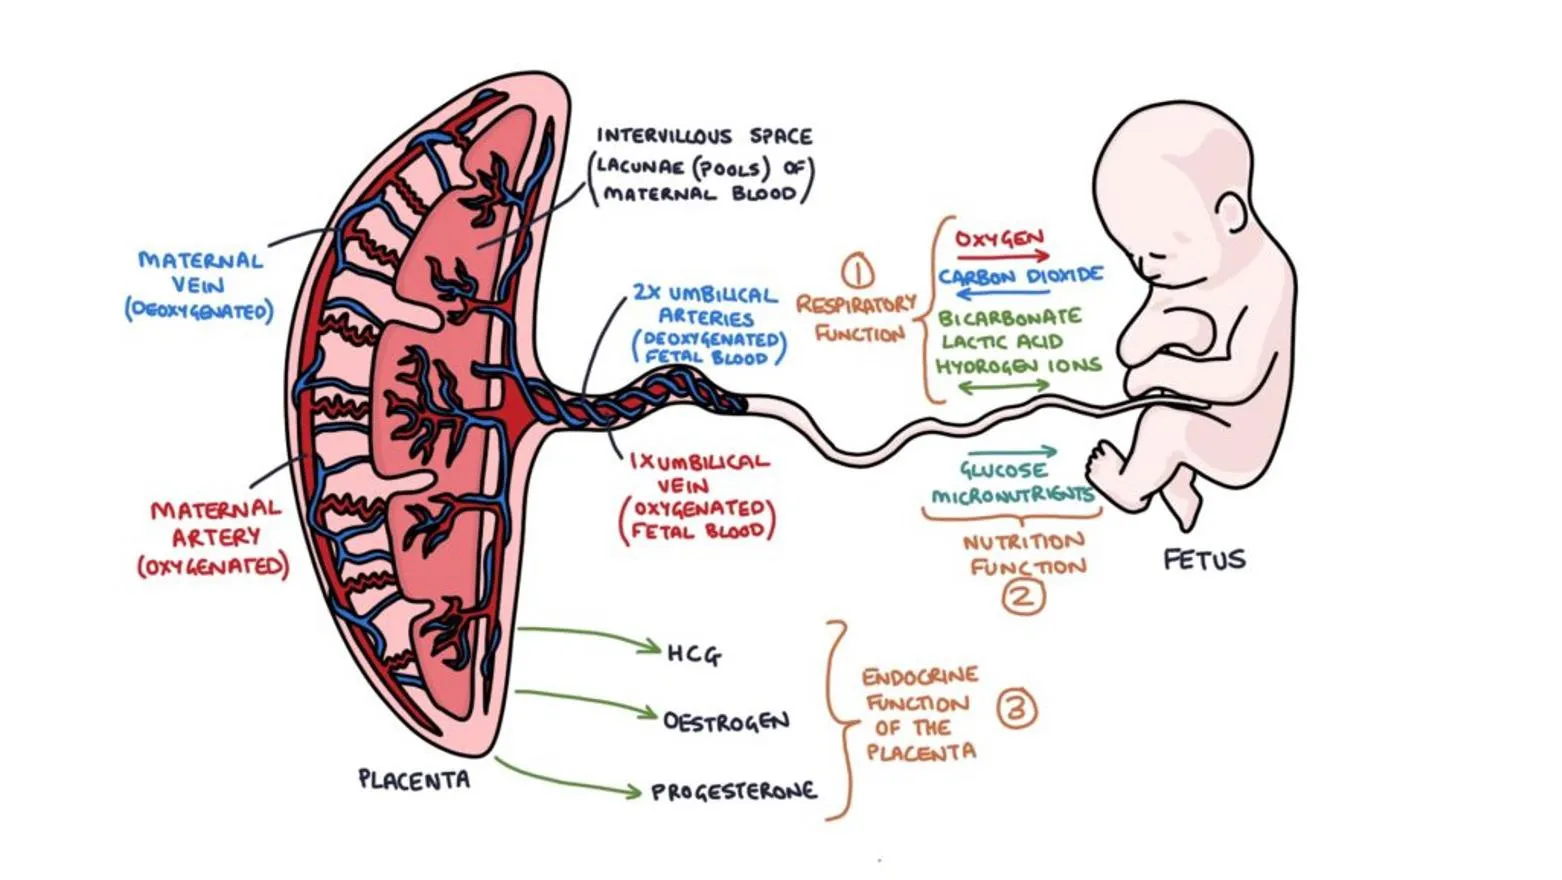 Some of the complex functions of the placenta in human development. (Source- Zero To Finals YouTube Channel)